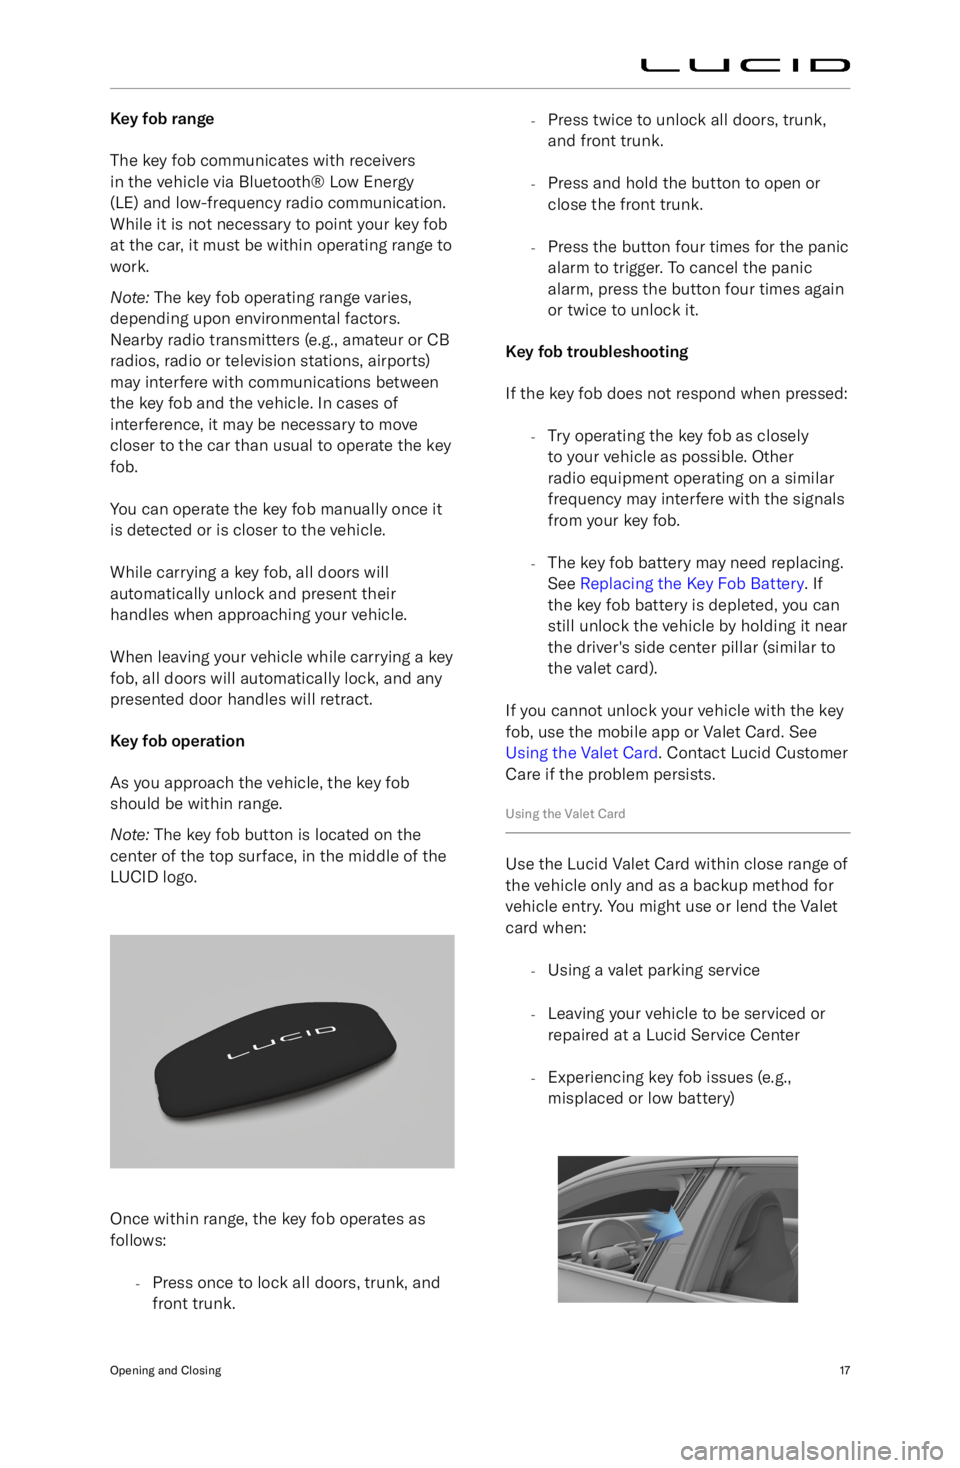 LUCID AIR 2023 Owners Manual Key fob range
The key fob communicates with receivers
in the vehicle via Bluetooth